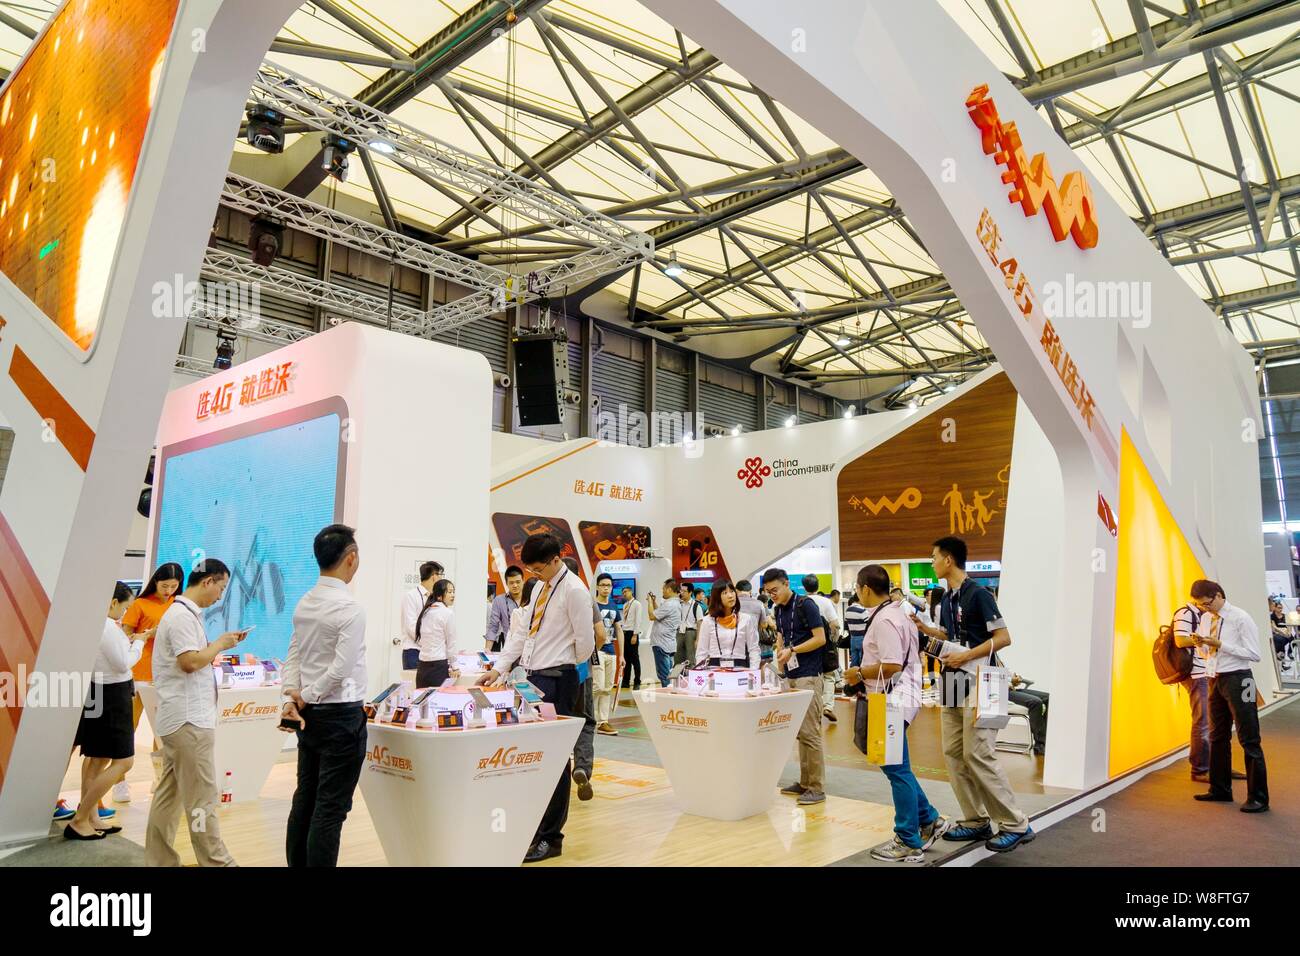 People visit the stand of China Unicom during the GSMA Mobile World Congress 2015 in Shanghai, China, 15 July 2015. Stock Photo